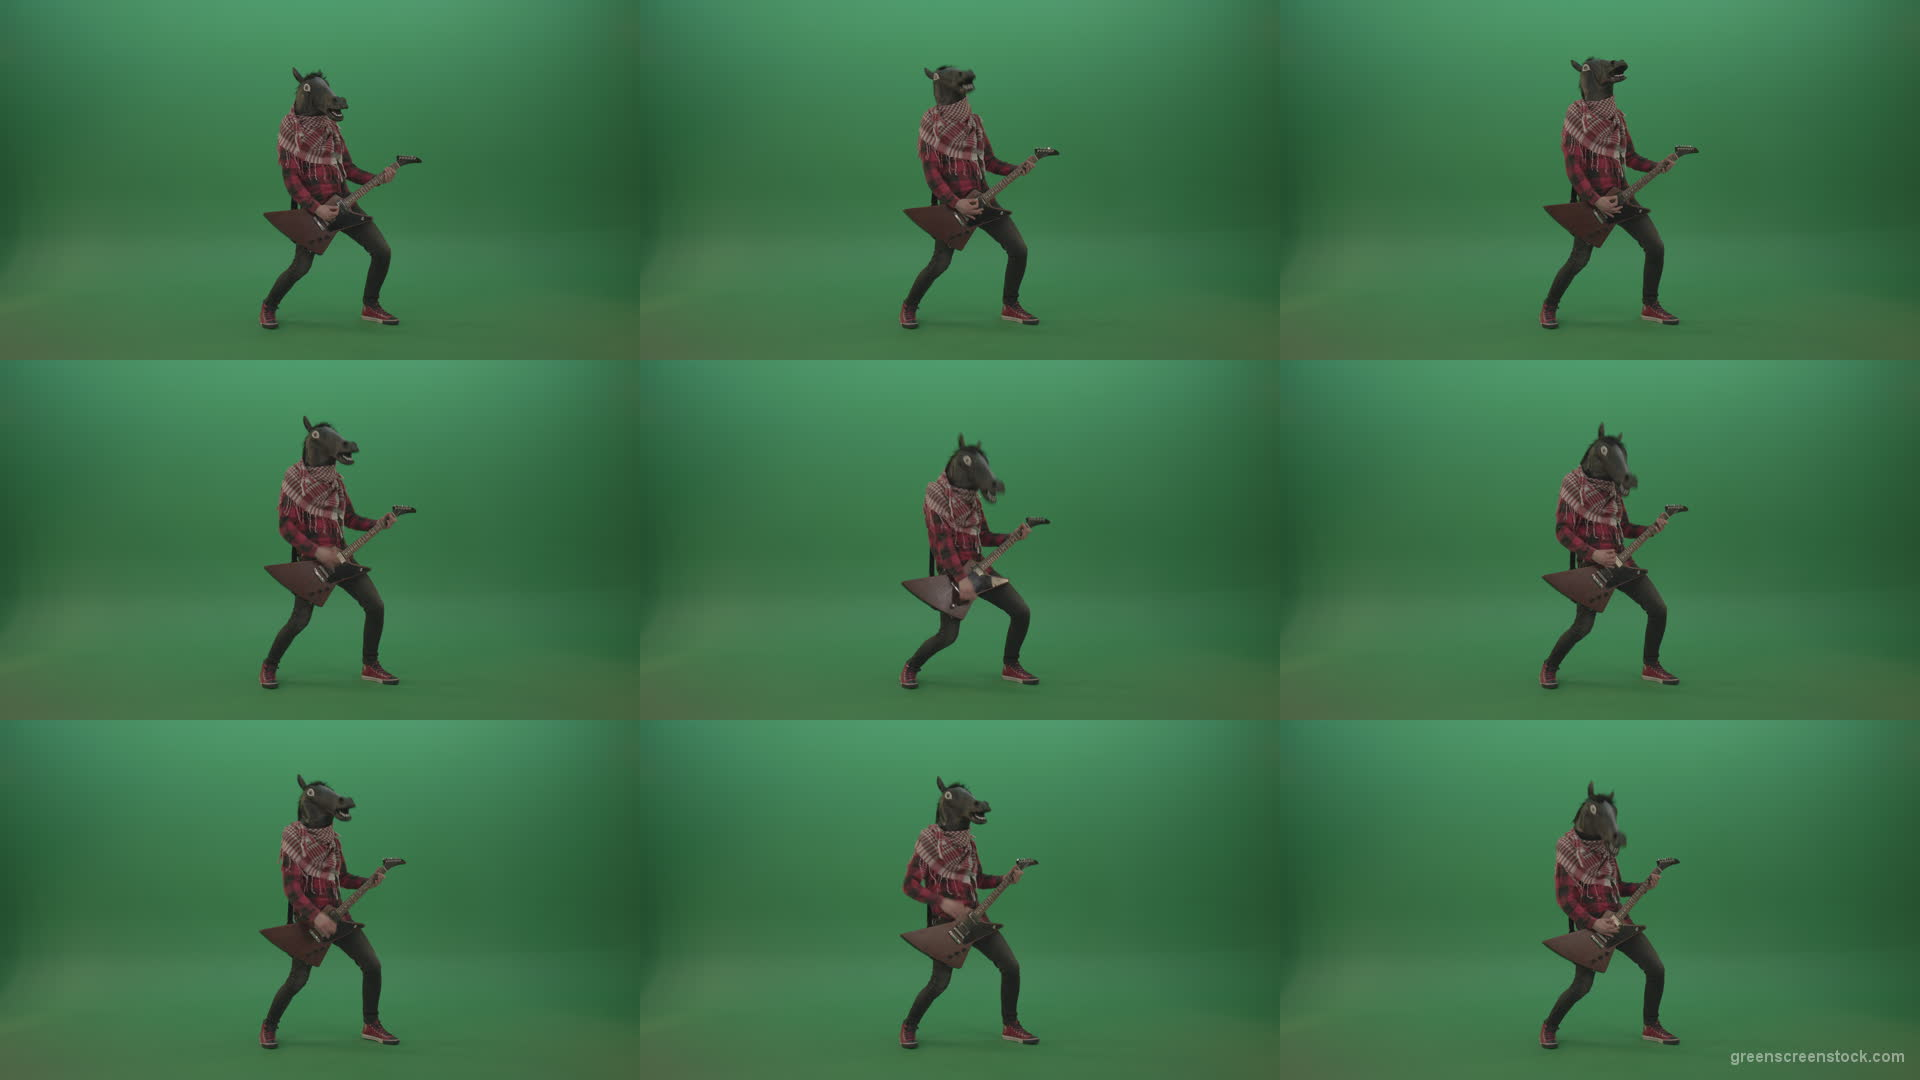 Green-screen-horse-man-guitaris-play-hard-rock-music-with-guitar-isolated-on-green-background Green Screen Stock